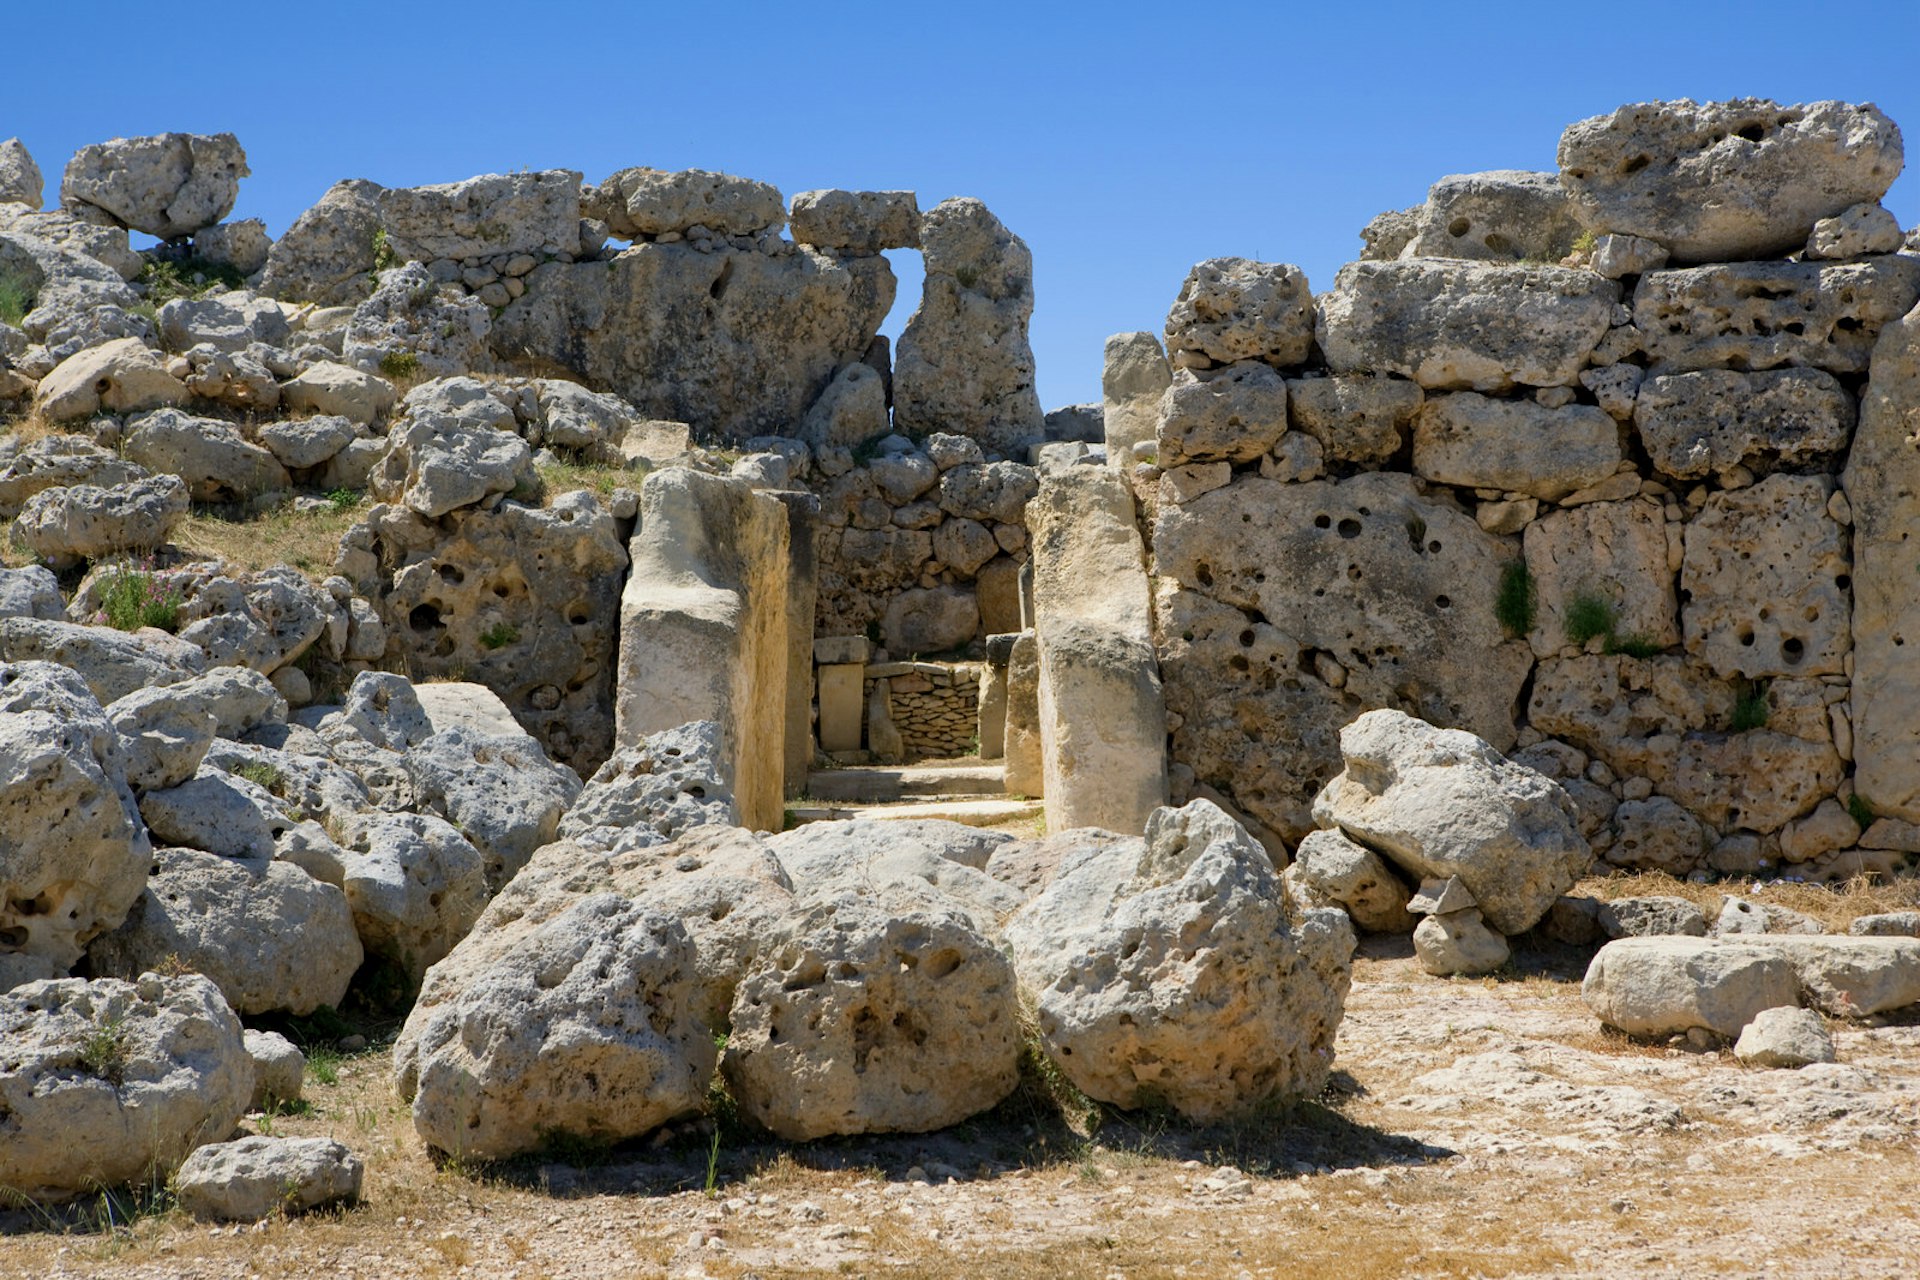 Large limestone boulders lay on the parched ground in front of the entrance to one of the Ġgantija Temples. Rough hewn slabs make up the outer walls, while the entrance is composed of two neatly carved monoliths © Jean-Pierre Lescourret / Lonely Planet